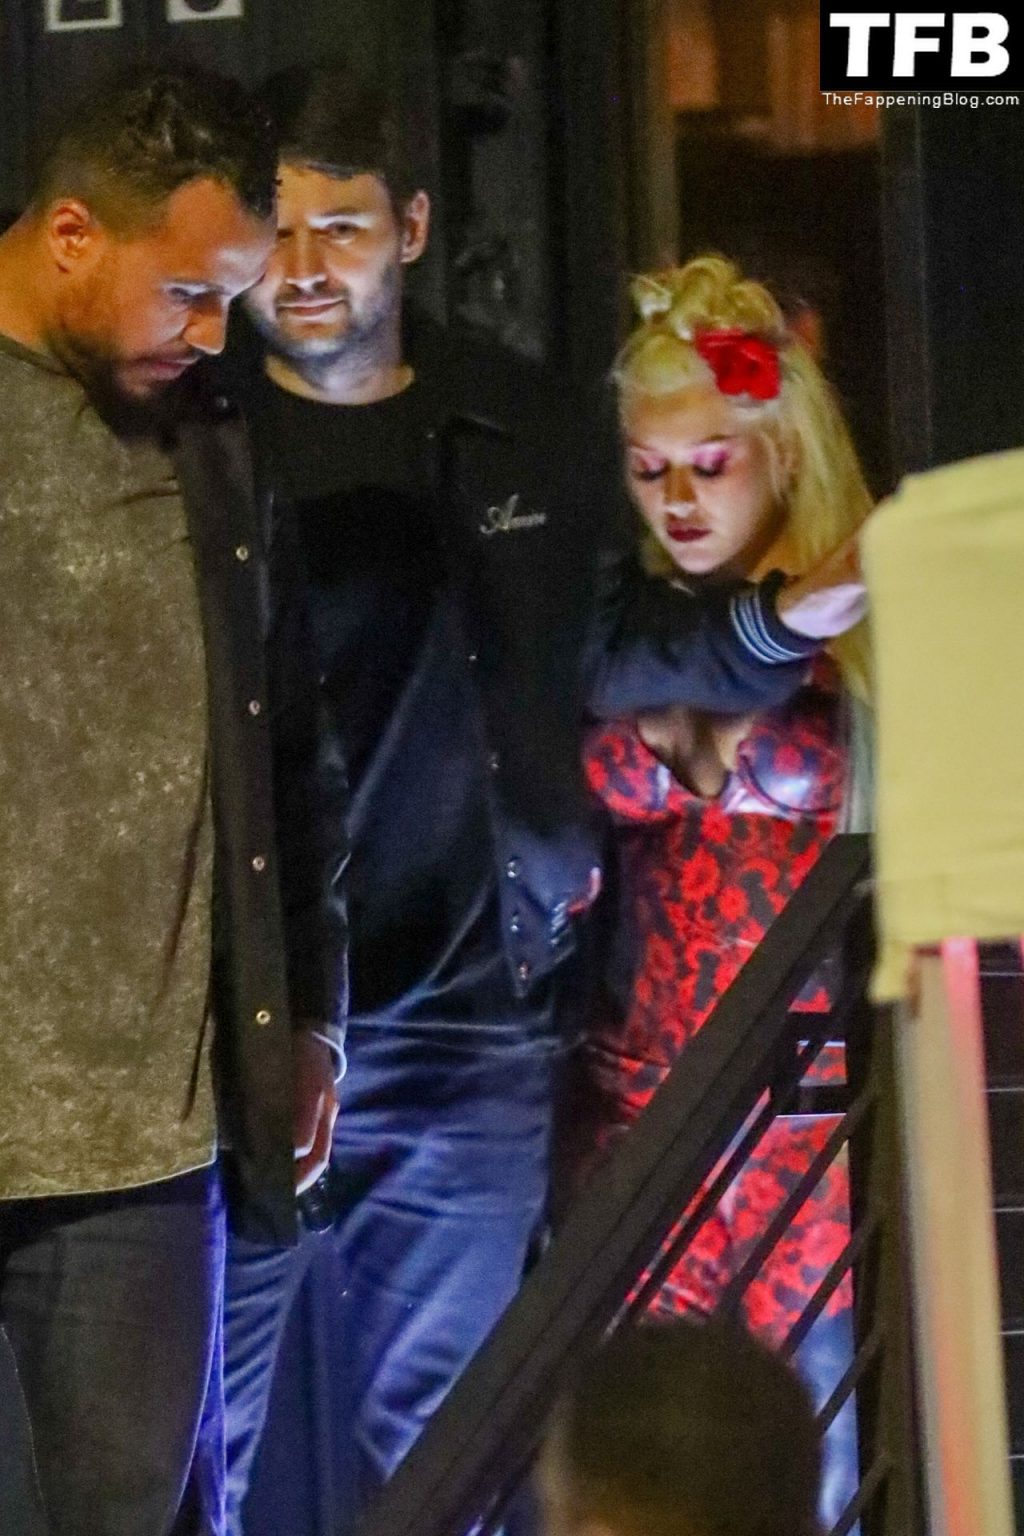 Christina Aguilera is in a Partying Mood as She Steps Out with Matthew Rutler in LA (17 Photos)